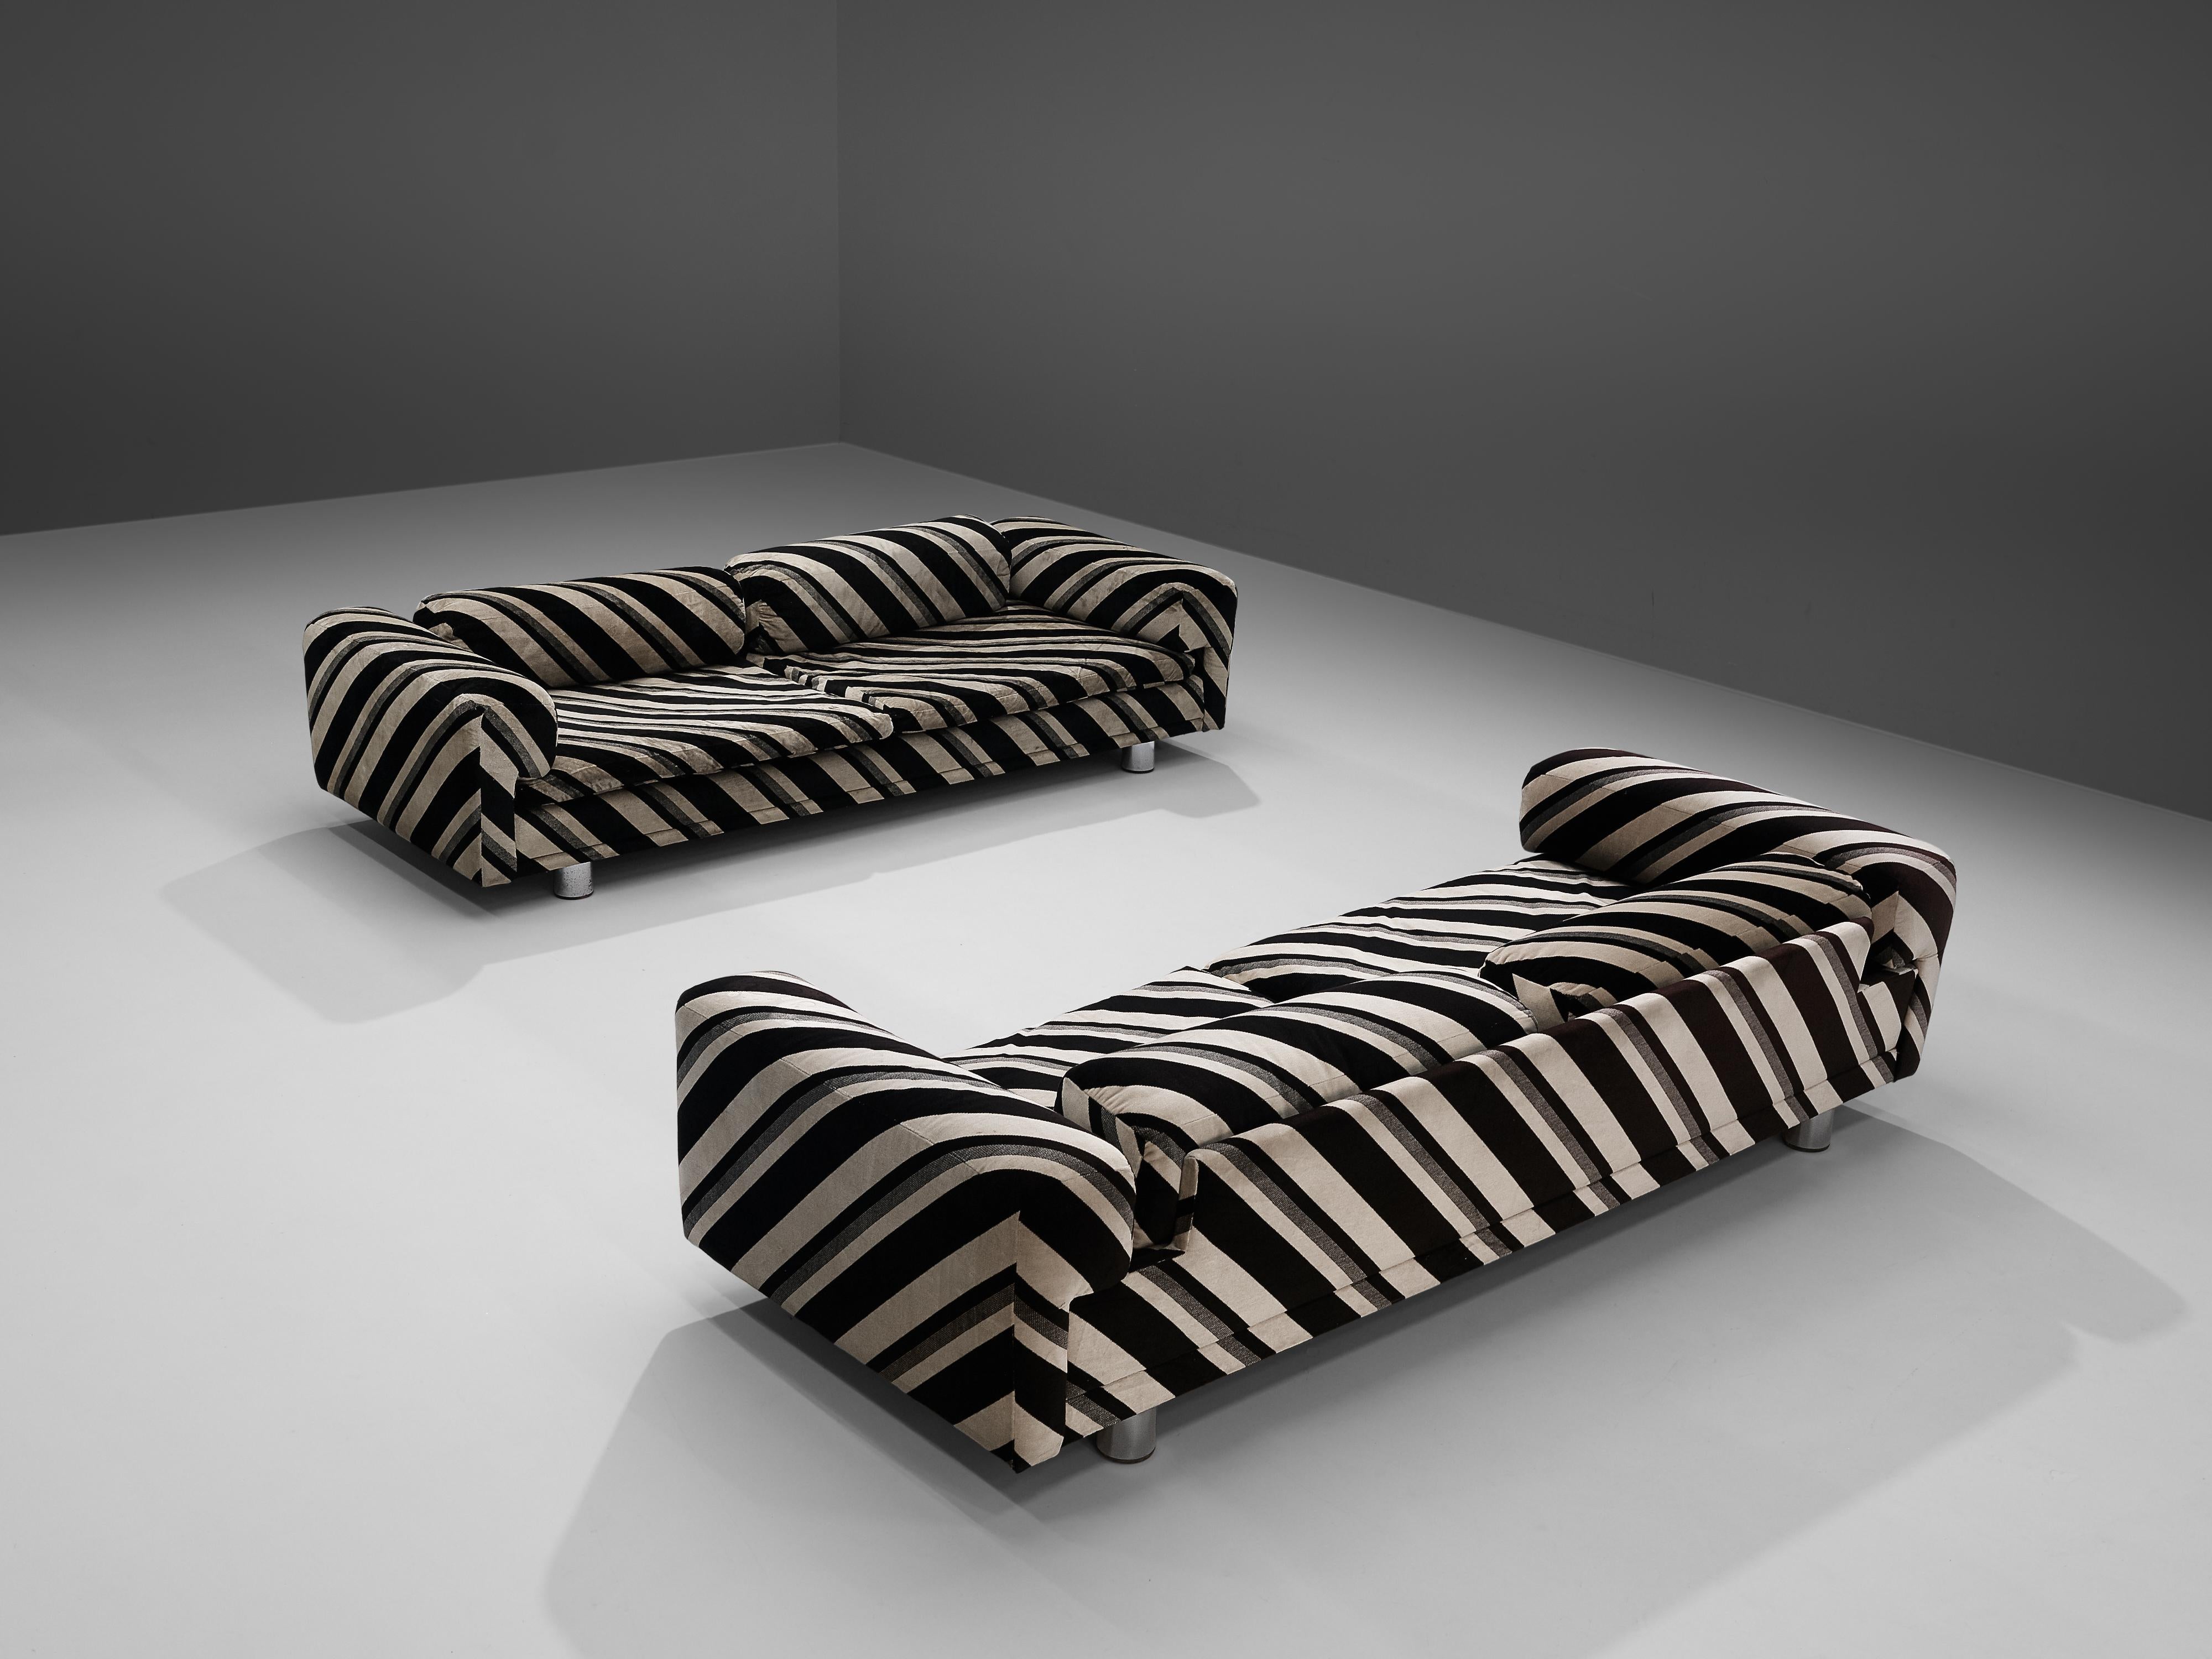 Howard Keith for HK Furniture, 'Diplomat' sofas, dark brown and beige striped fabric, metal, United Kingdom, 1970s.

Grand voluptuous 'Diplomat' sofas by Howard Keith for HK Furniture, designed in the 1970s. These two sofas with a deep seat are a